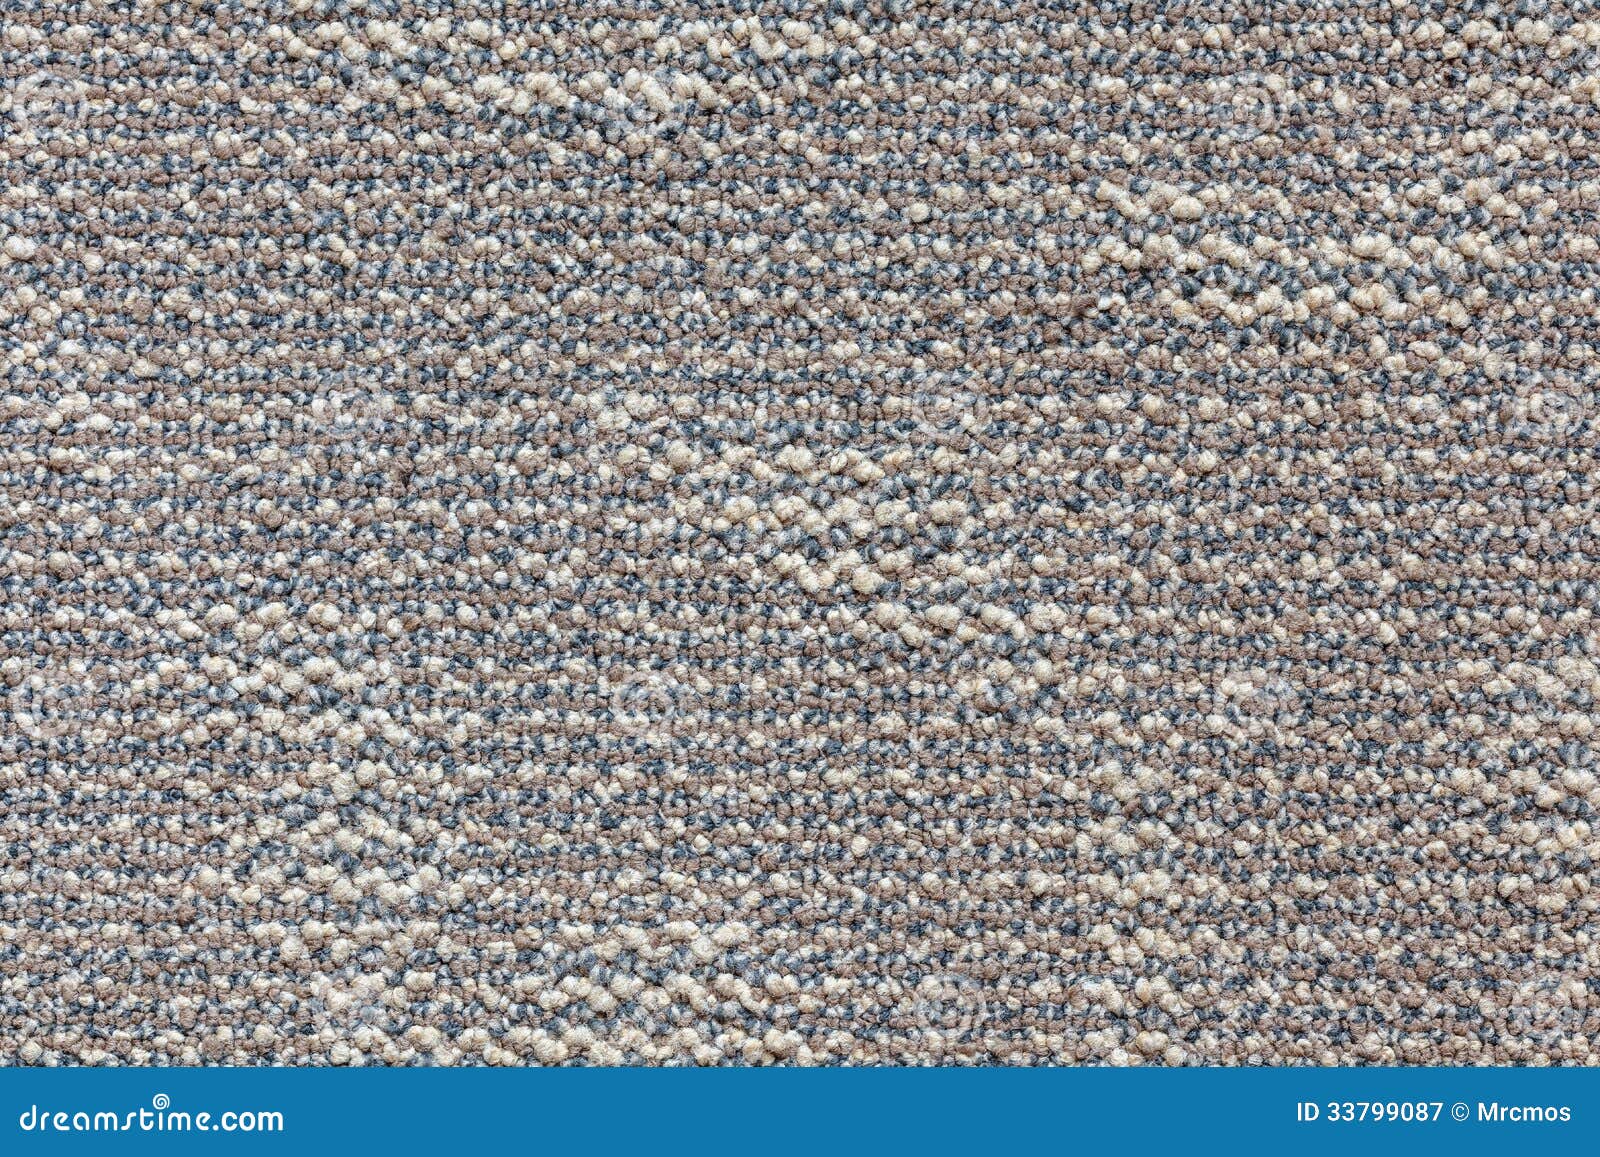 Close Up Old Carpet Texture Stock Image - Image of abstract, beautiful ...